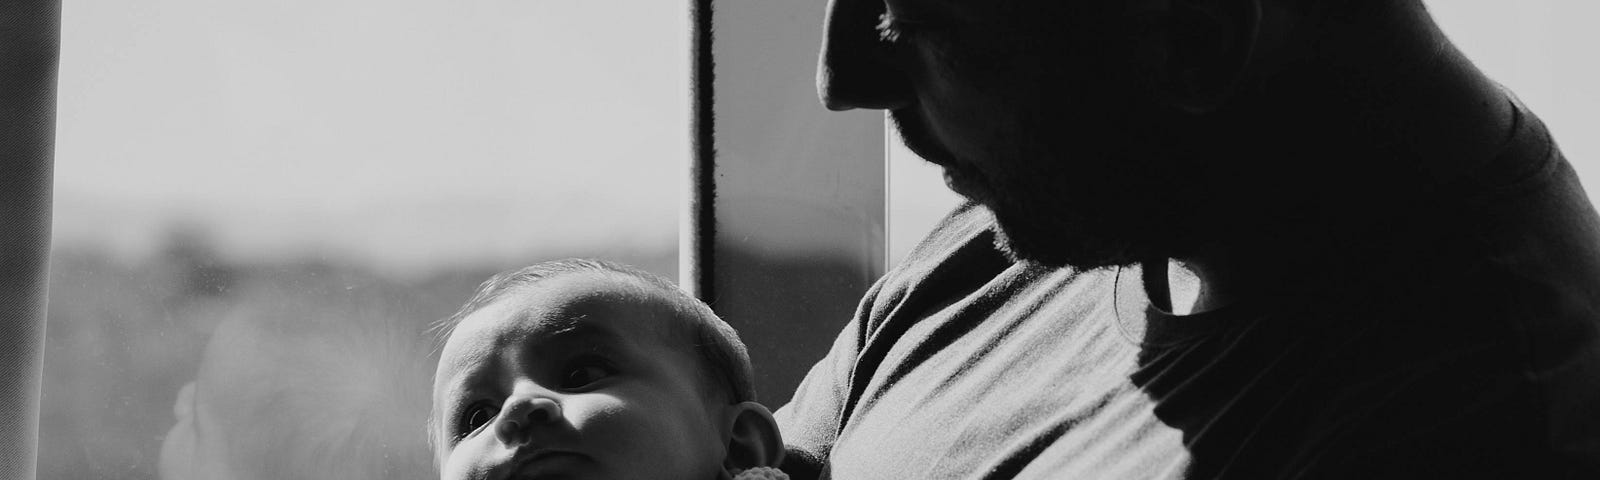 black and white photo of male holding infant baby in arms with strong shadowing